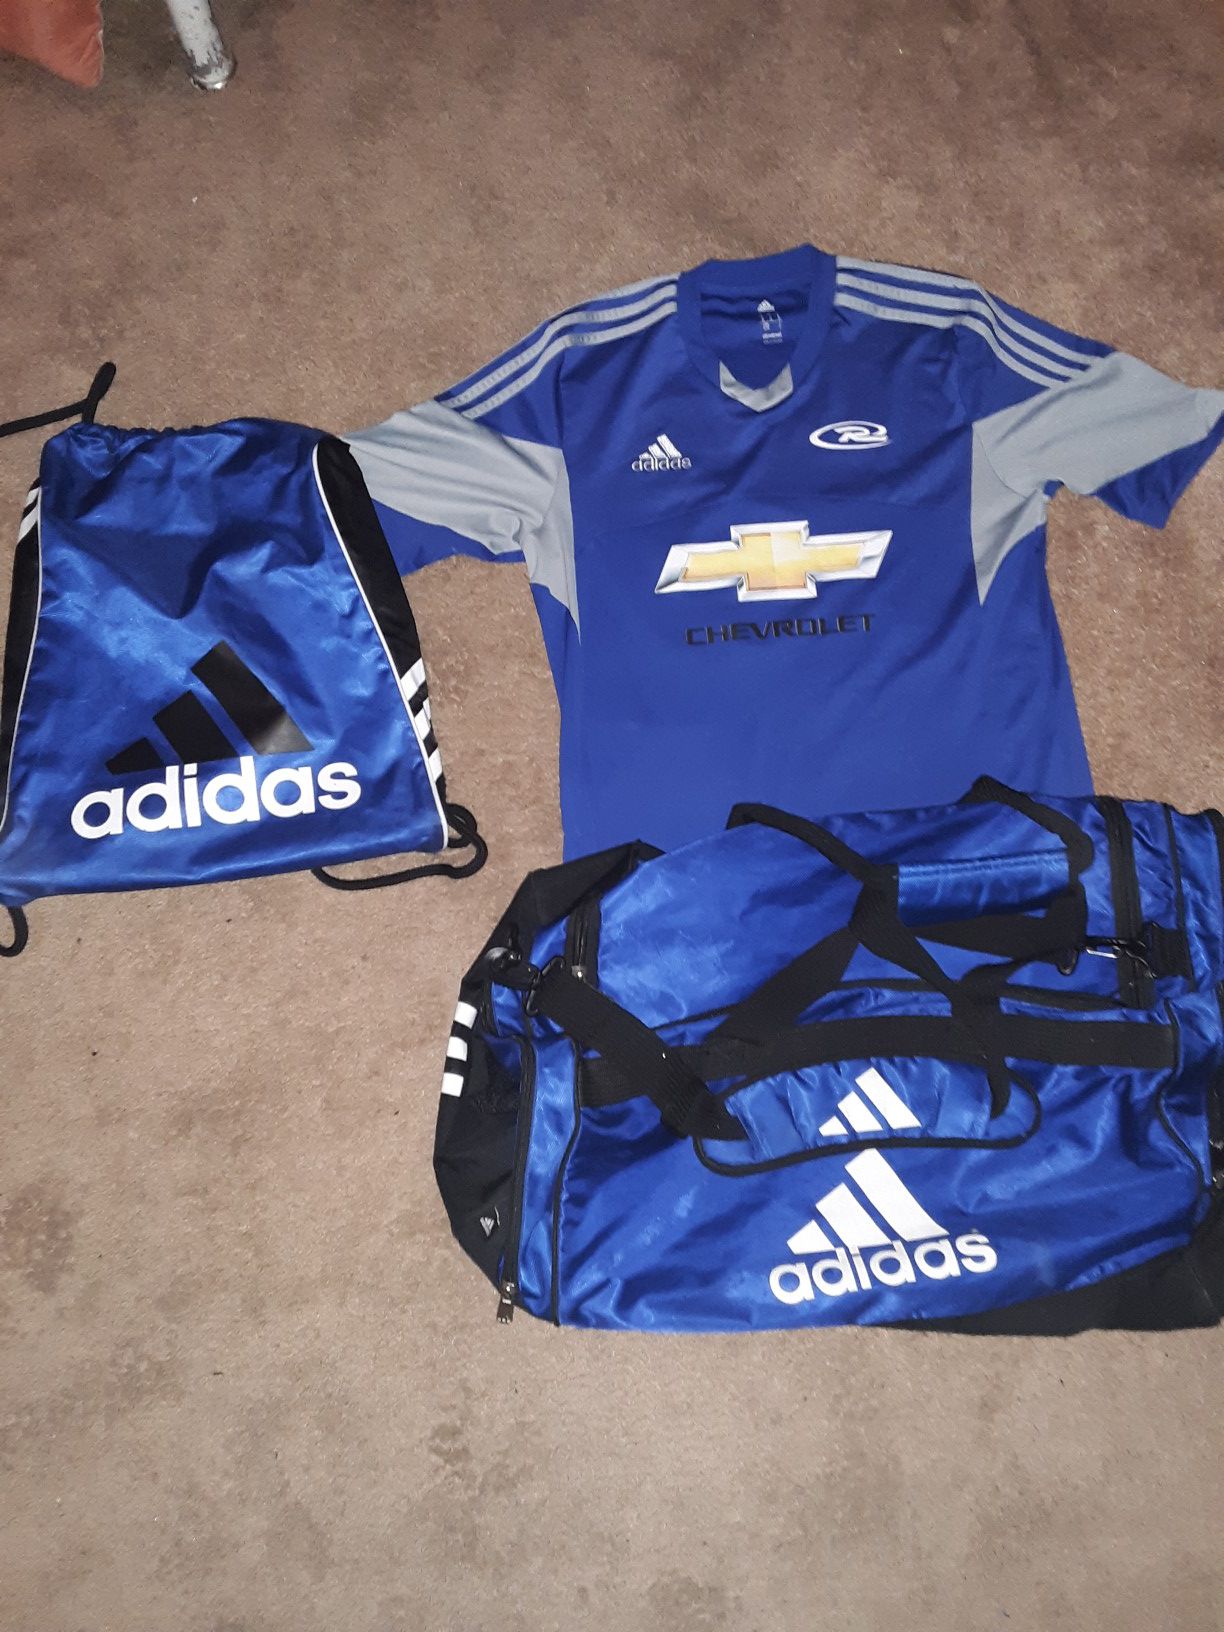 Addidas Gym Bags & Chevrolet Soccer Jersey